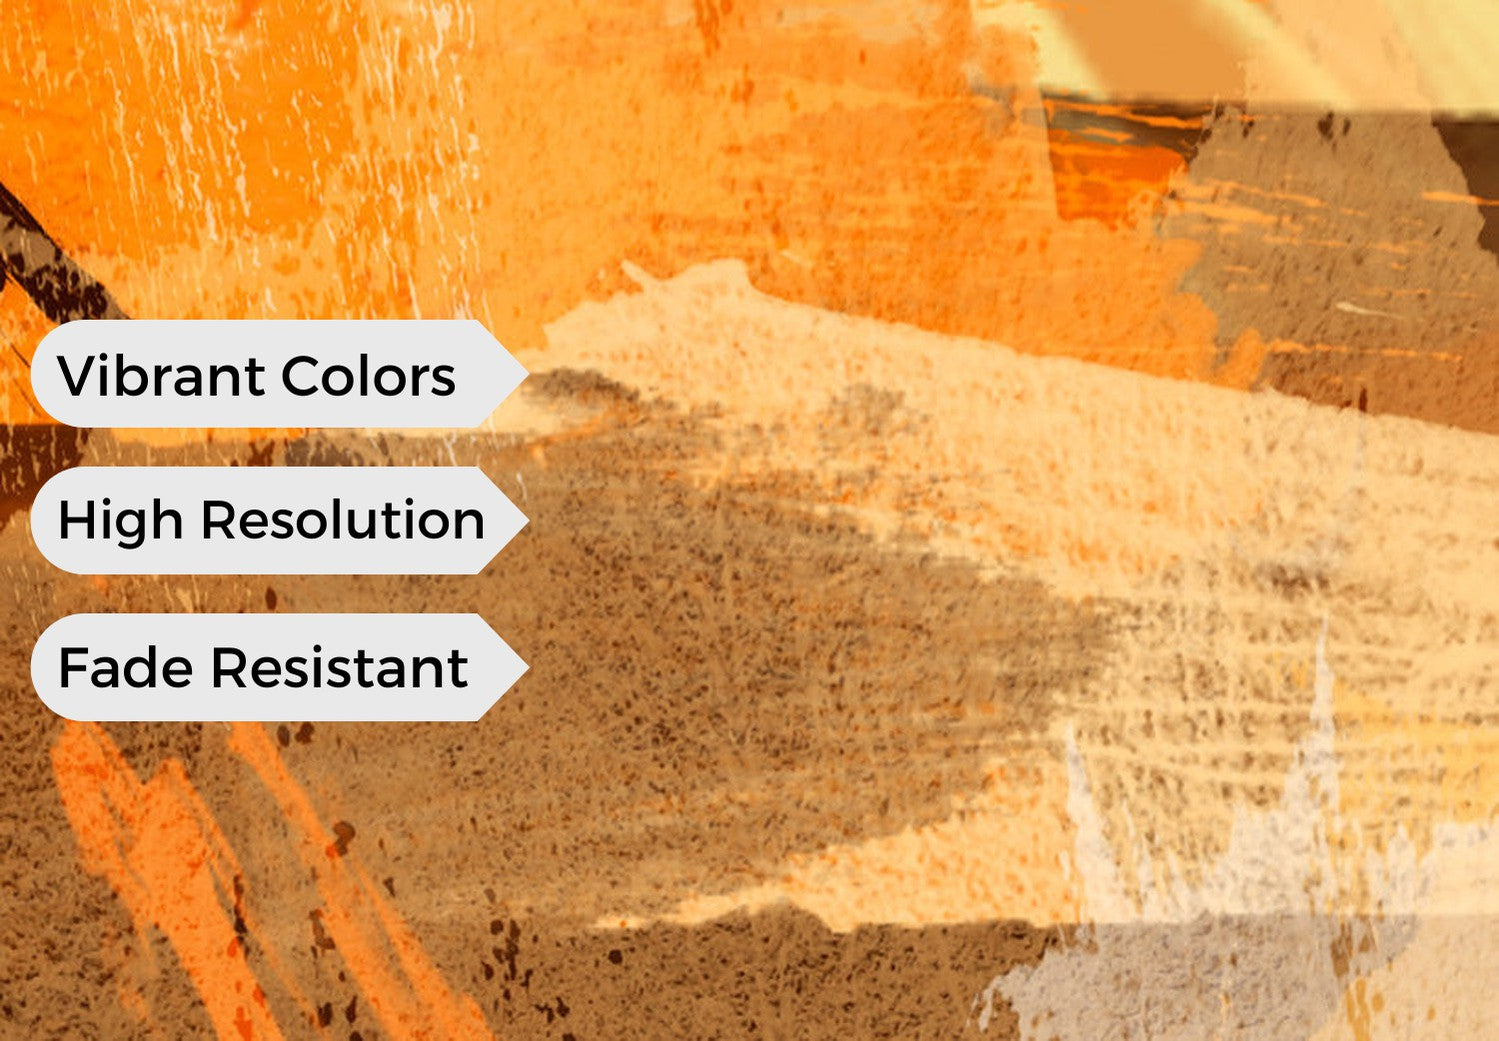 Abstract Canvas Wall Art - Pros And Cons